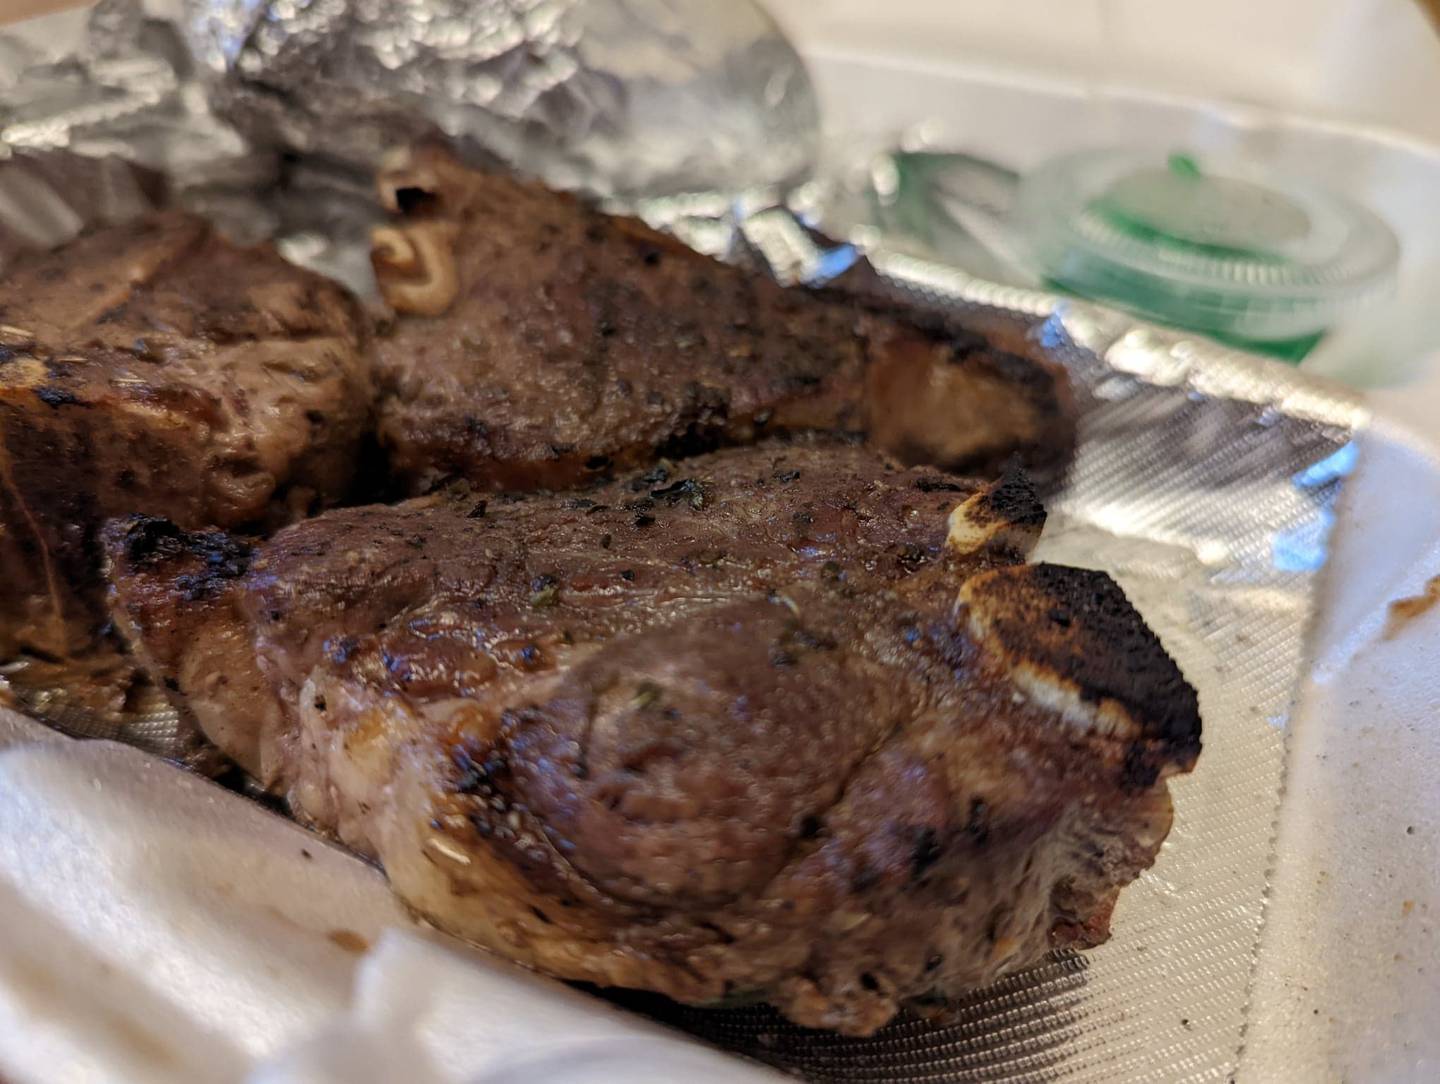 Pictured was three lamb chops from Al's Steak House in Joliet. They arrived a perfect medium rare, as ordered, and beautifully seasoned with a side of mint jelly.